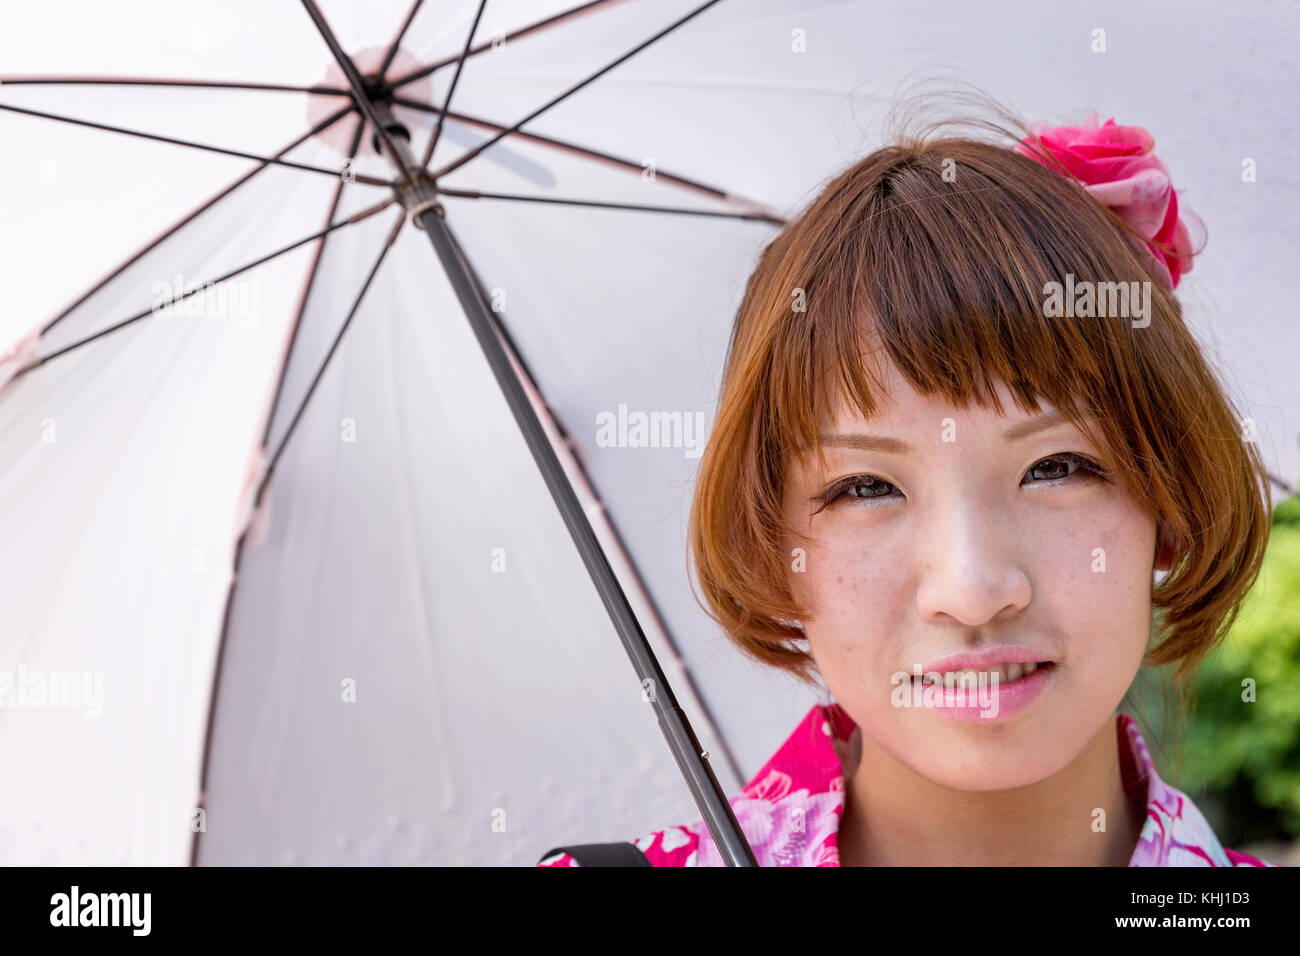 Portrait of a smiling Japanese woman, Tokyo, Japan Stock Photo